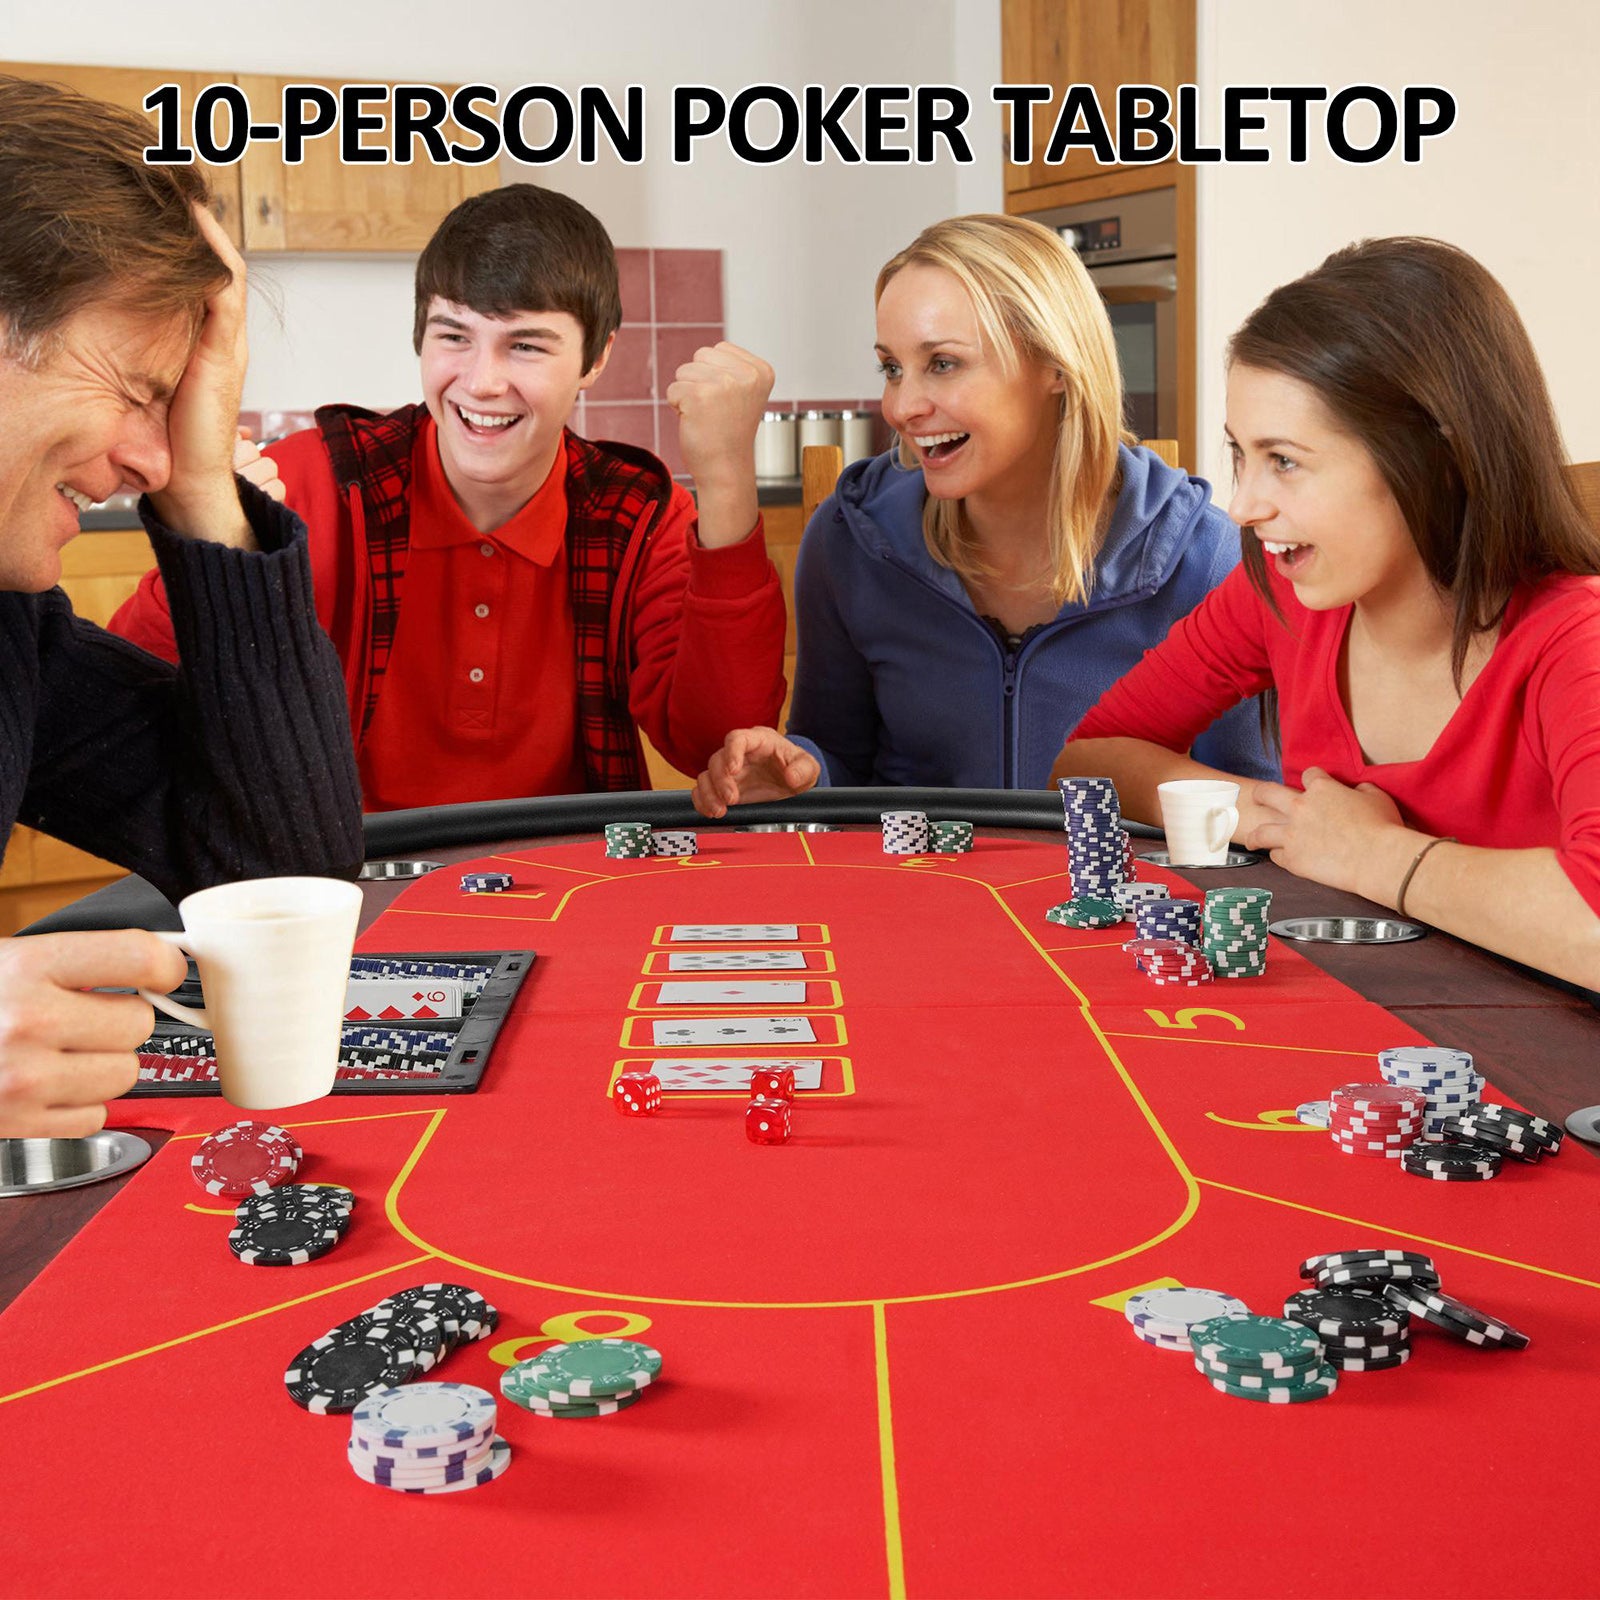 10 Players Foldable Poker Texas Holdem Table with Stainless Steel Cup Holders Padded Rails, Red